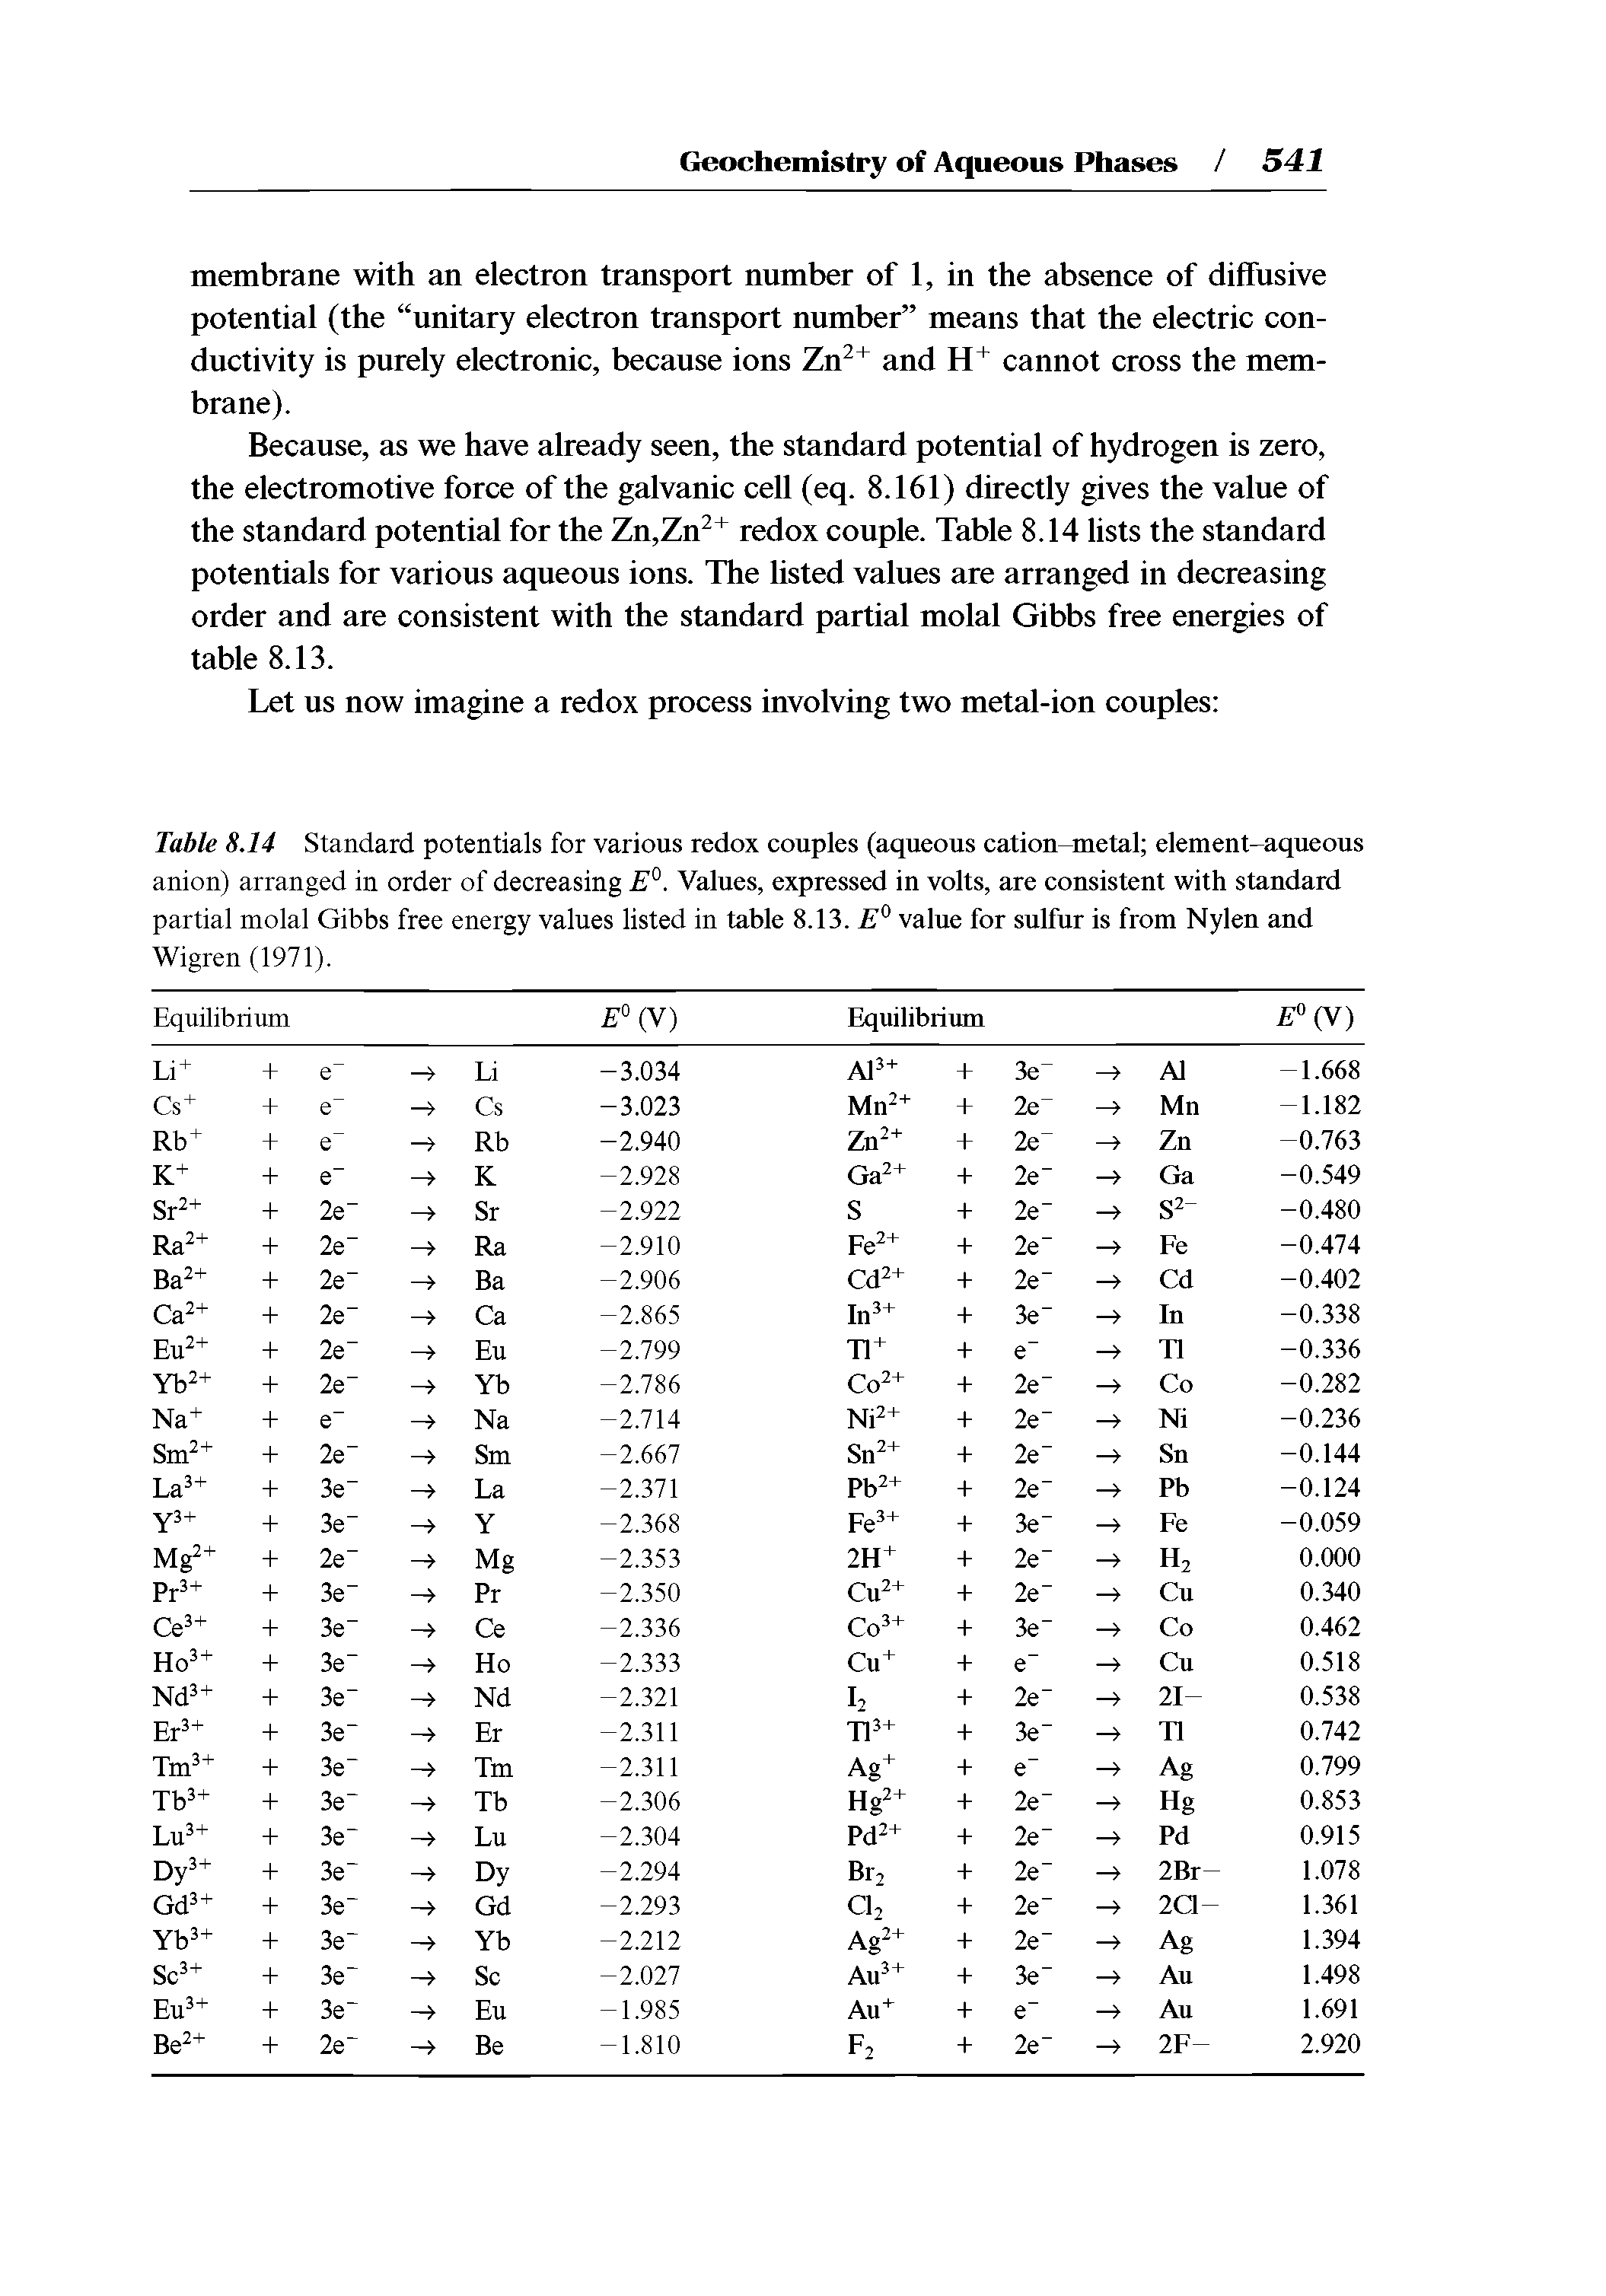 Table 8.14 Standard potentials for various redox couples (aqueous cation-metal element-aqueous anion) arranged in order of decreasing E°. Valnes, expressed in volts, are consistent with standard partial molal Gibbs free energy values listed in table 8.13. valne for snlfur is from Nylen and Wigren (1971).